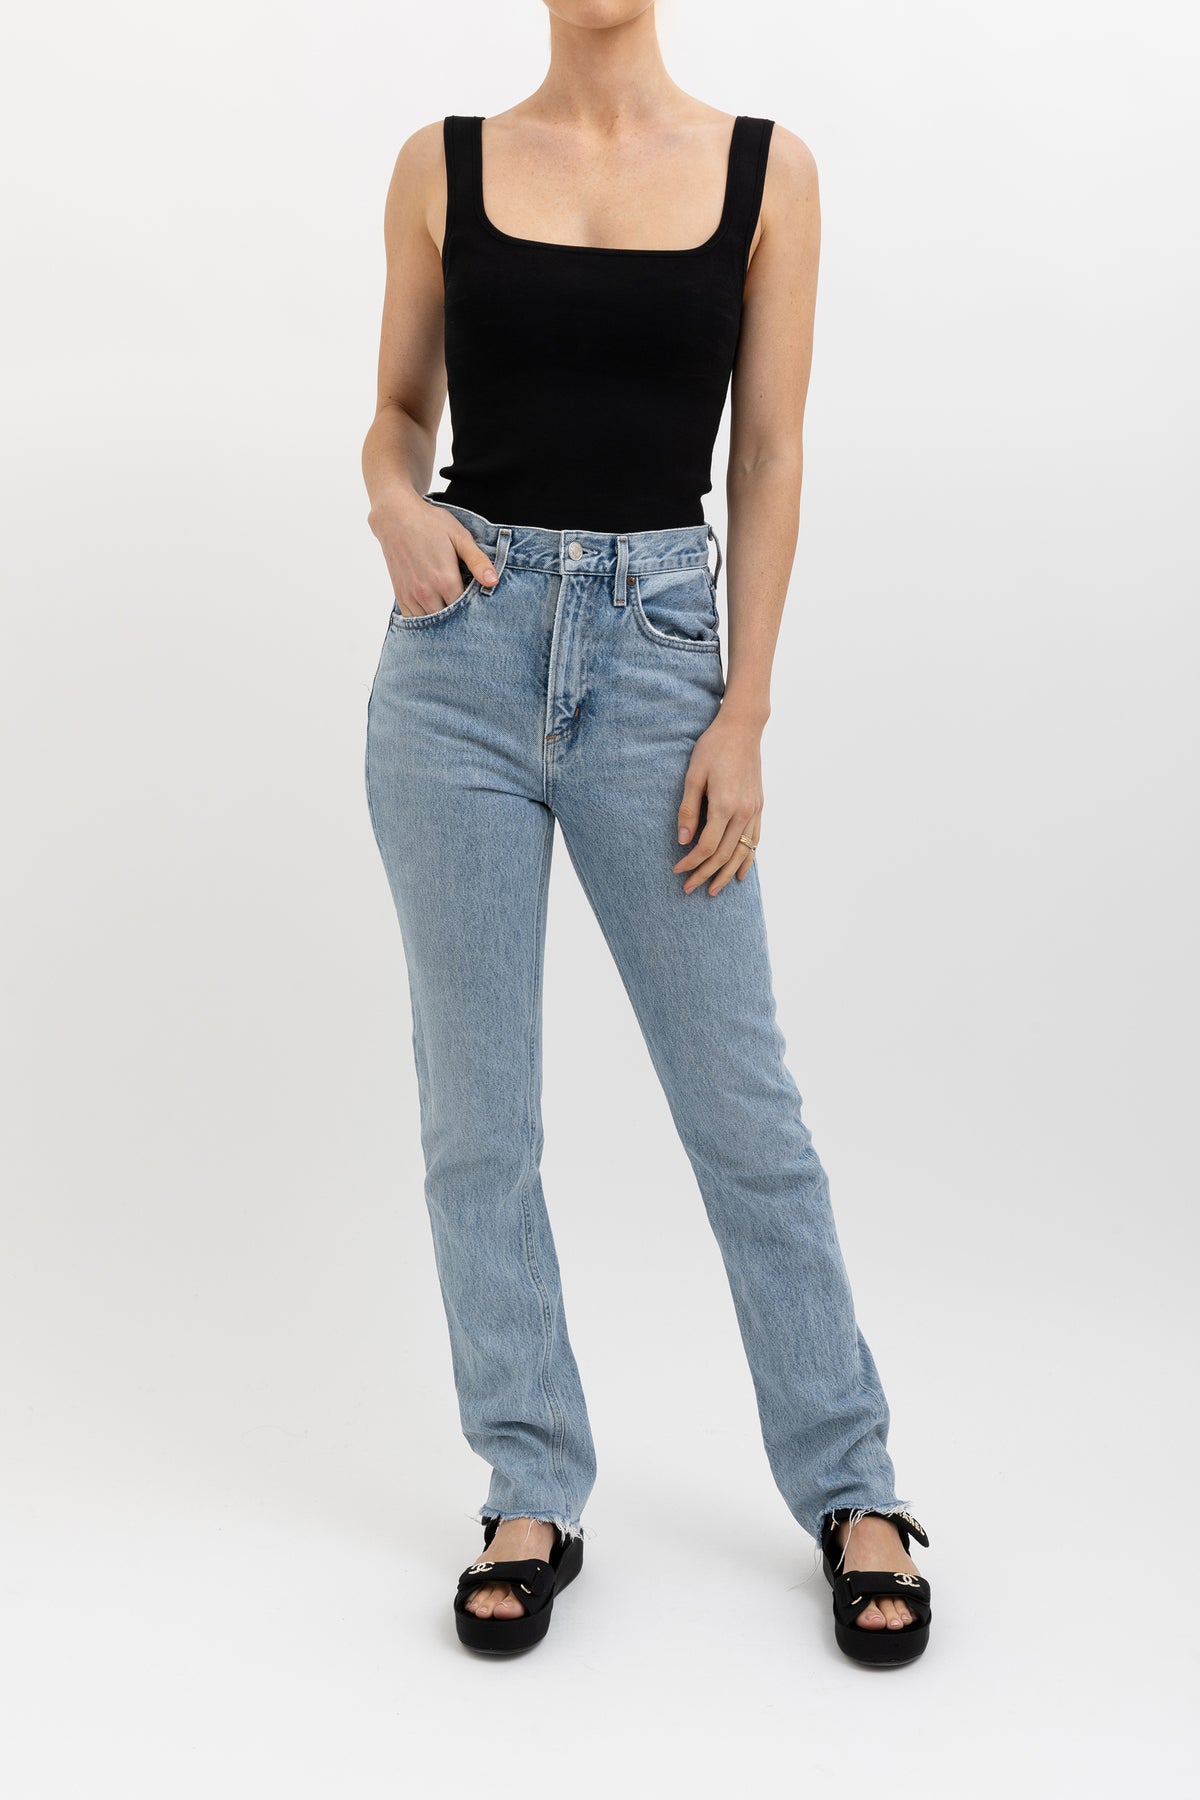 Cherie High Rise Jeans